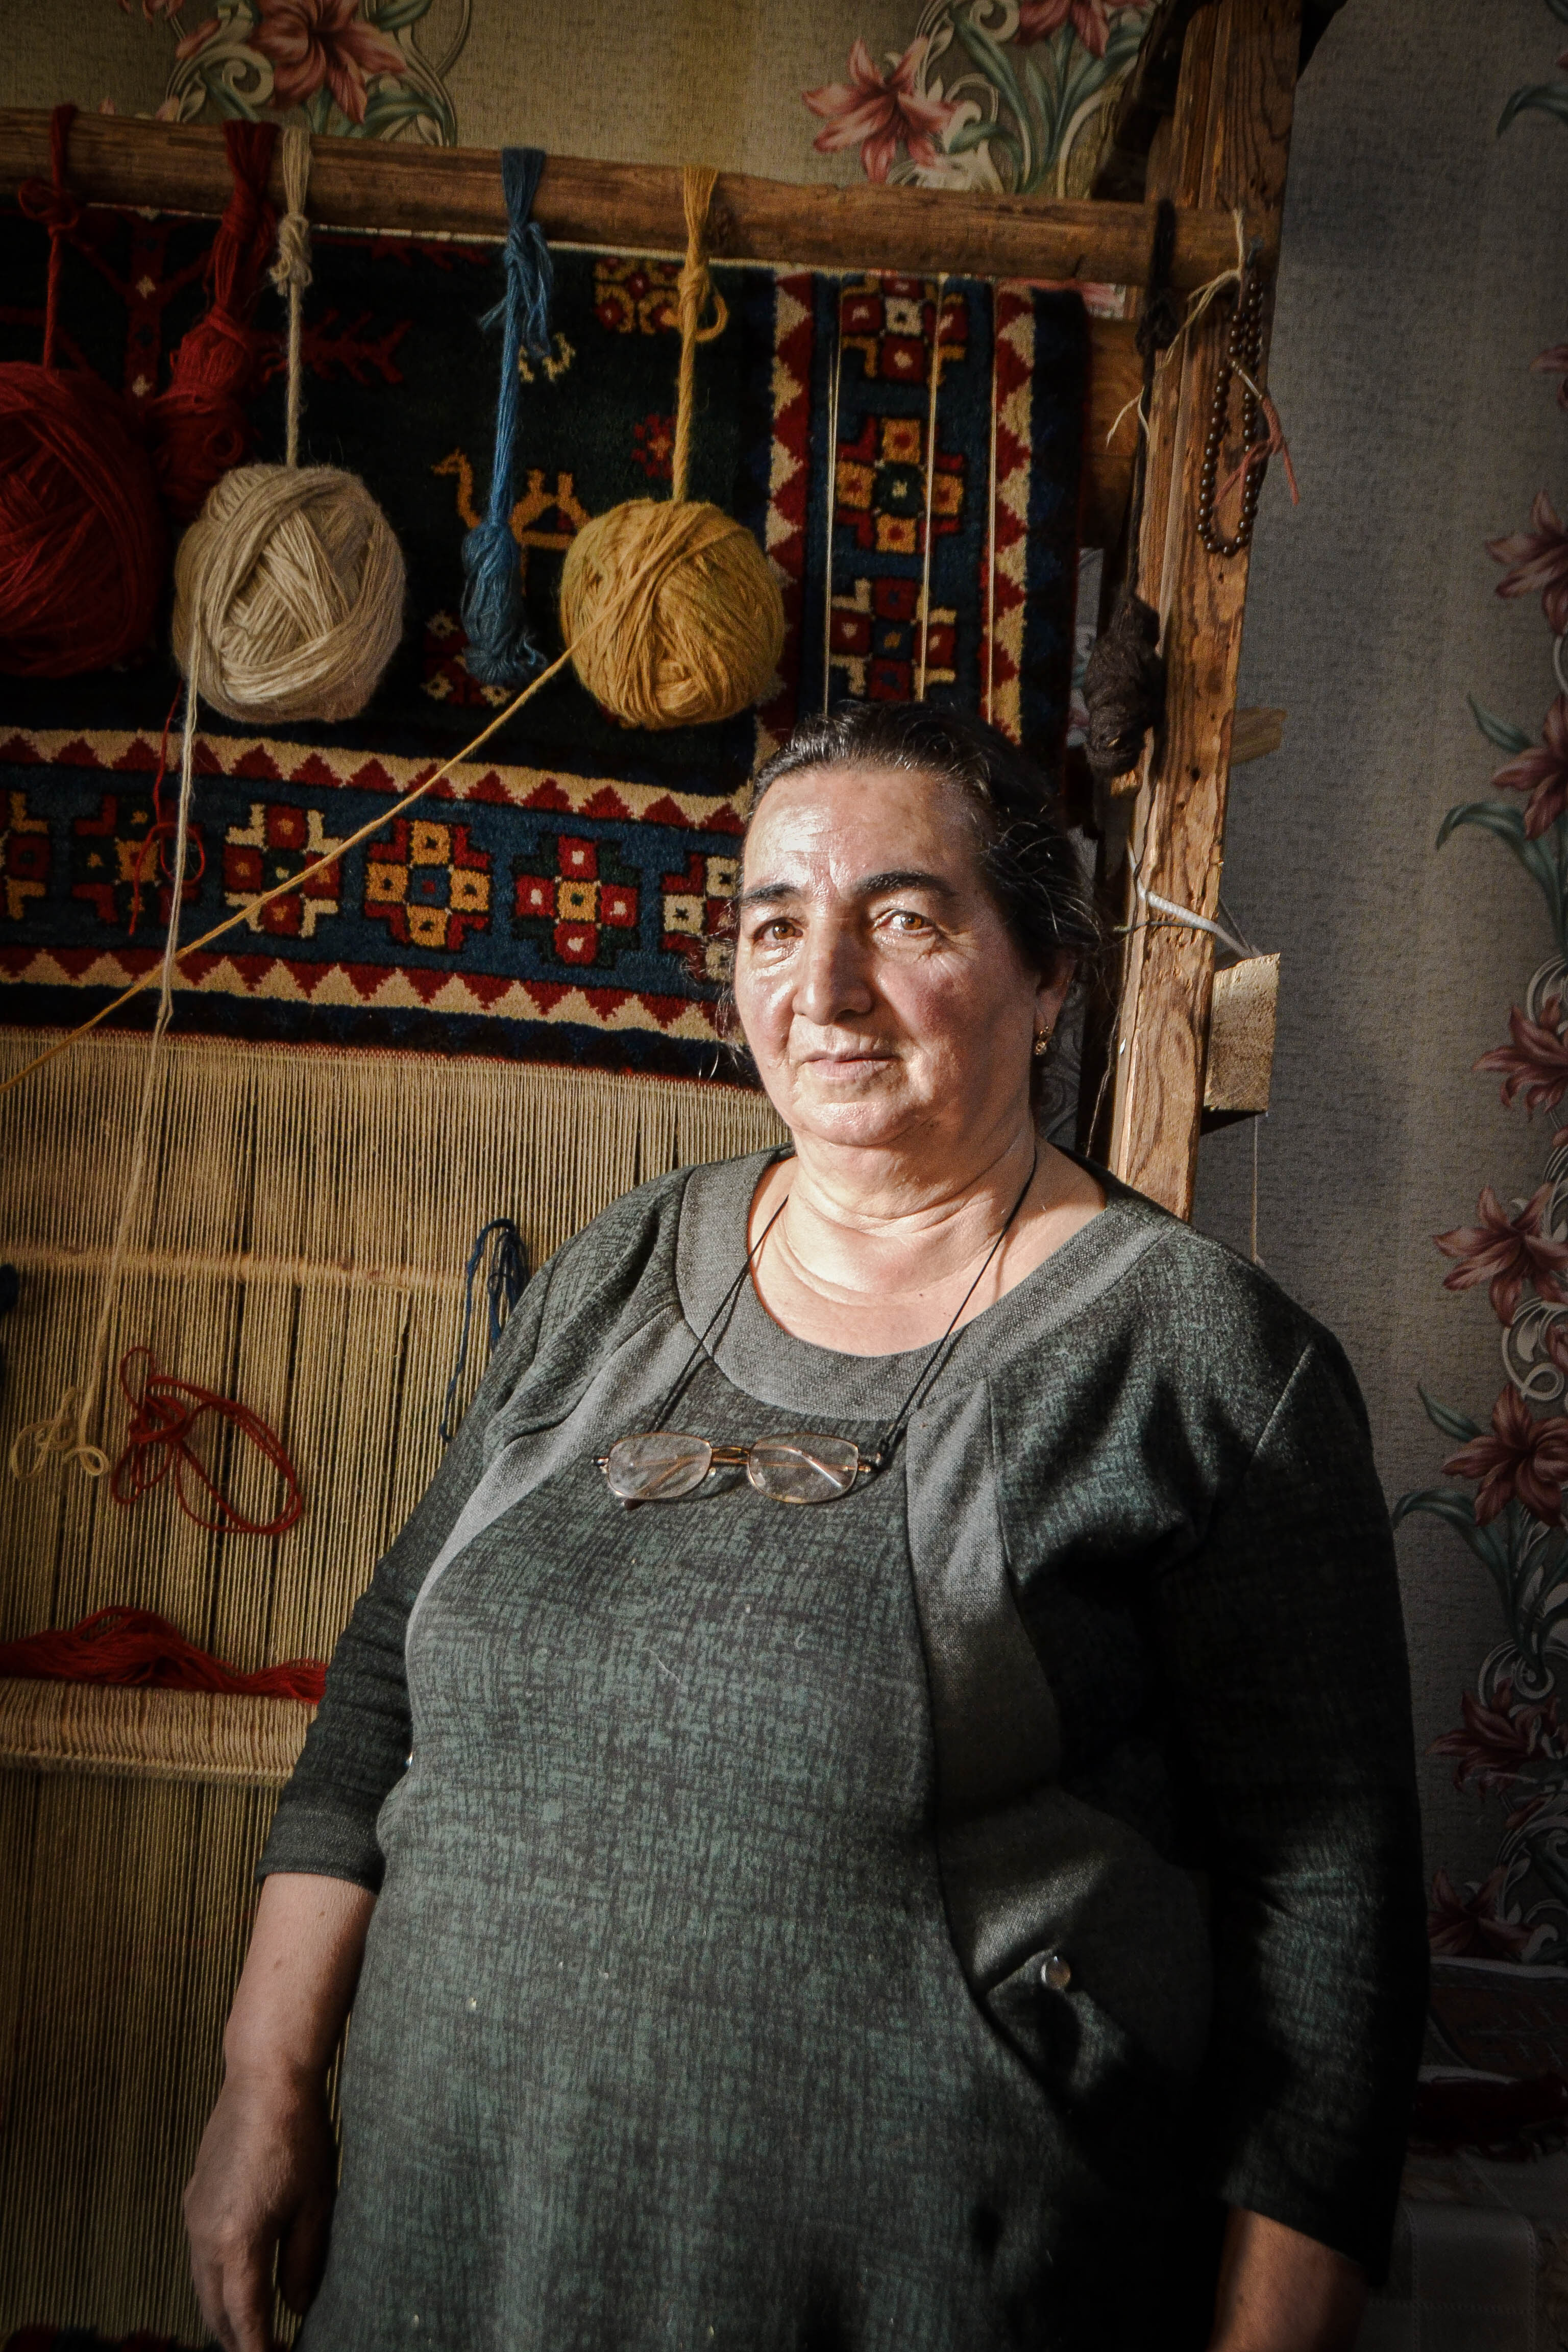 Zenfira Kajarova, 62, moved to Kosalari when she got married at the age of 17. Her mother-in-law tau ...